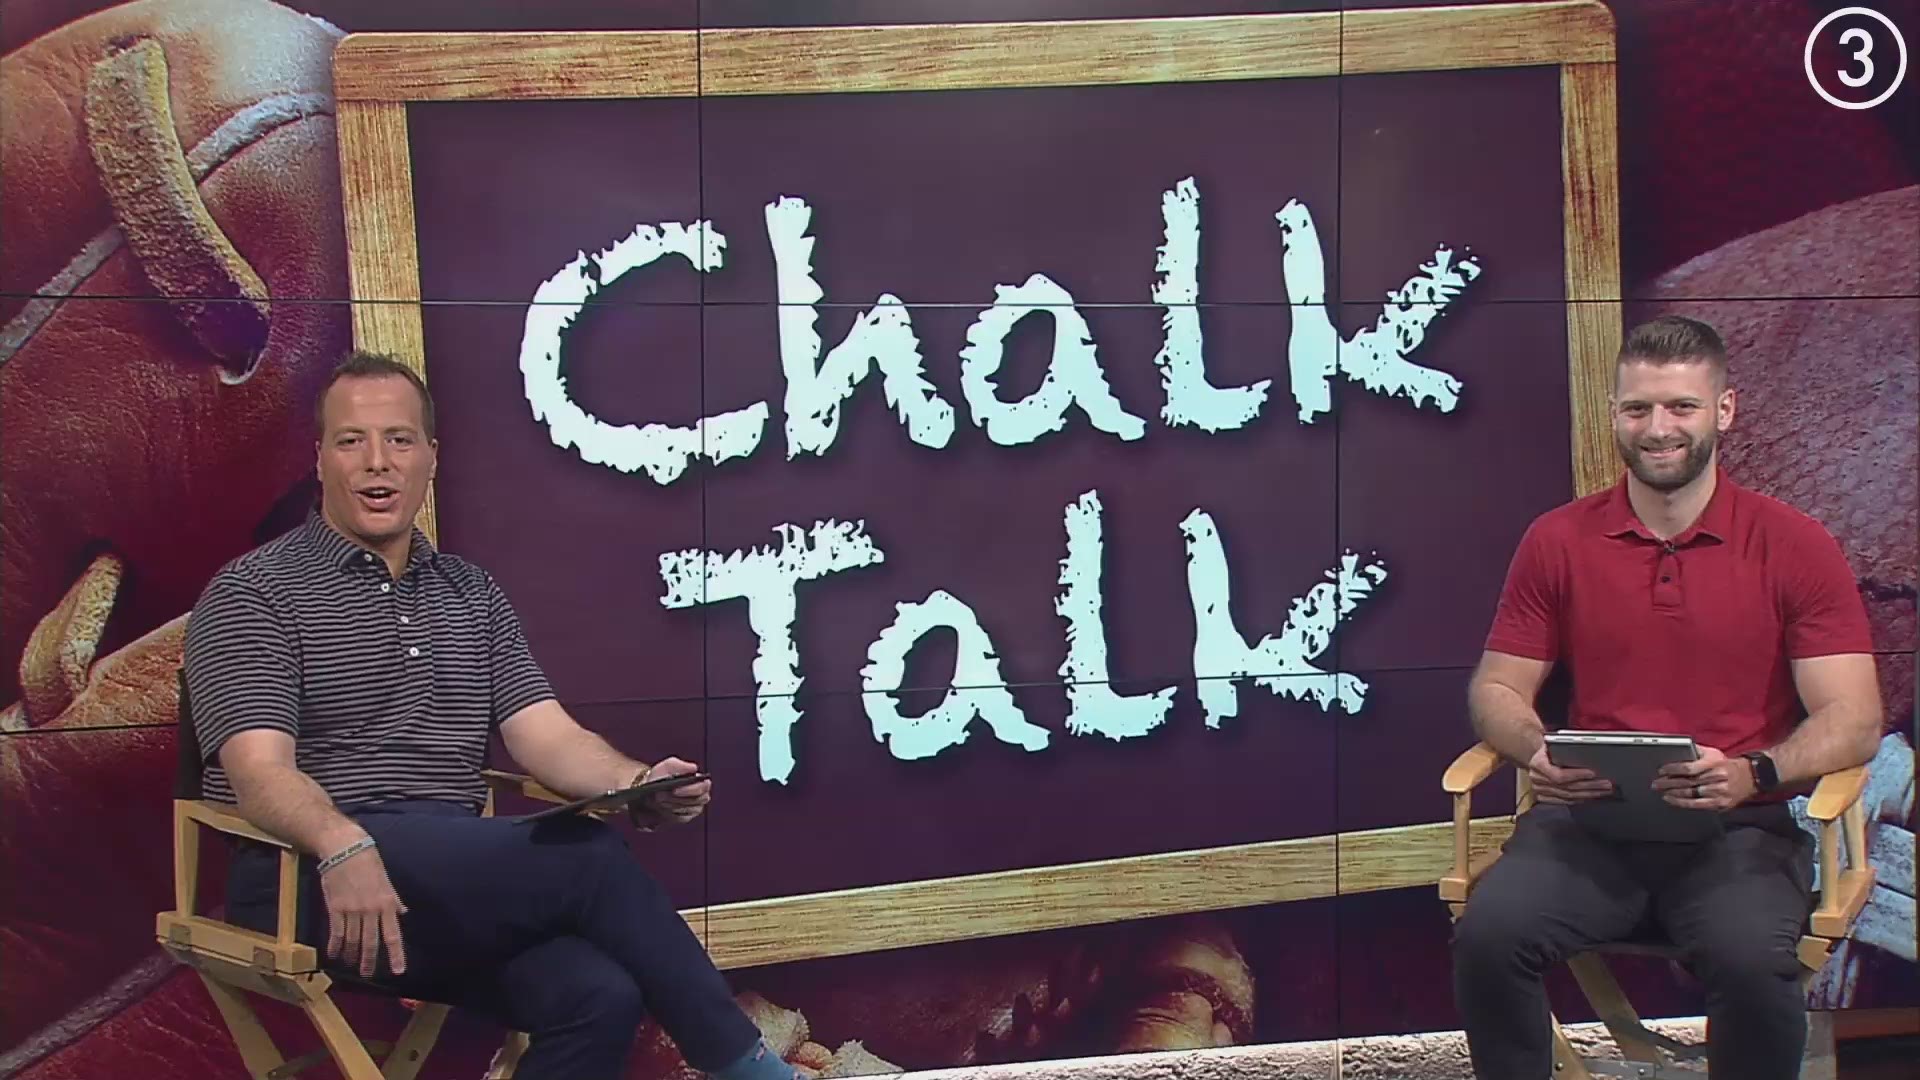 In the first episode of WKYC's Chalk Talk, WKYC's Nick Camino and Ben Axelrod breakdown Week 2 of the College Football Season and Week 1 of the NFL slate.